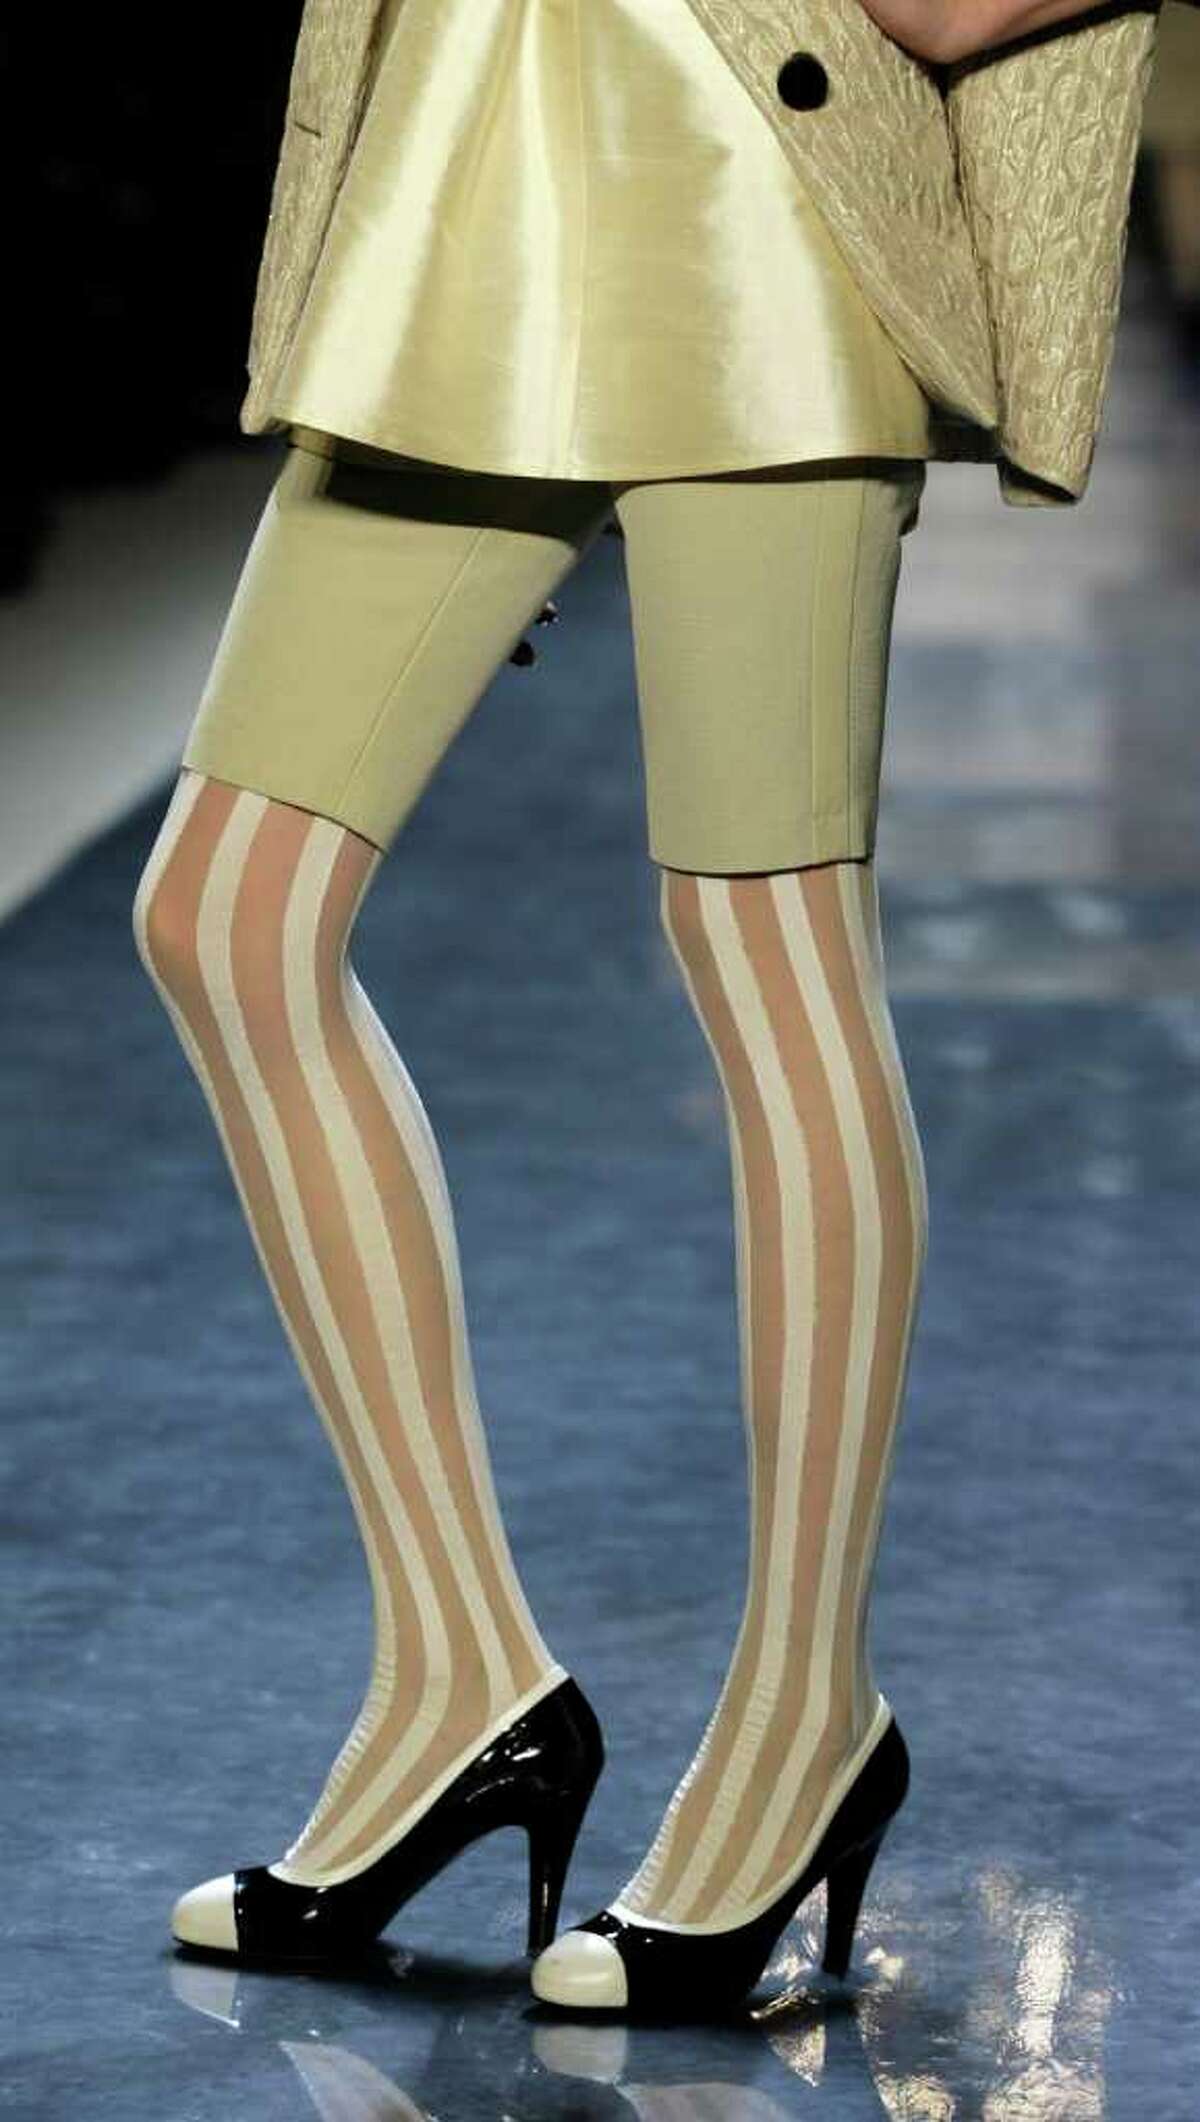 Does pantyhose trend have legs?